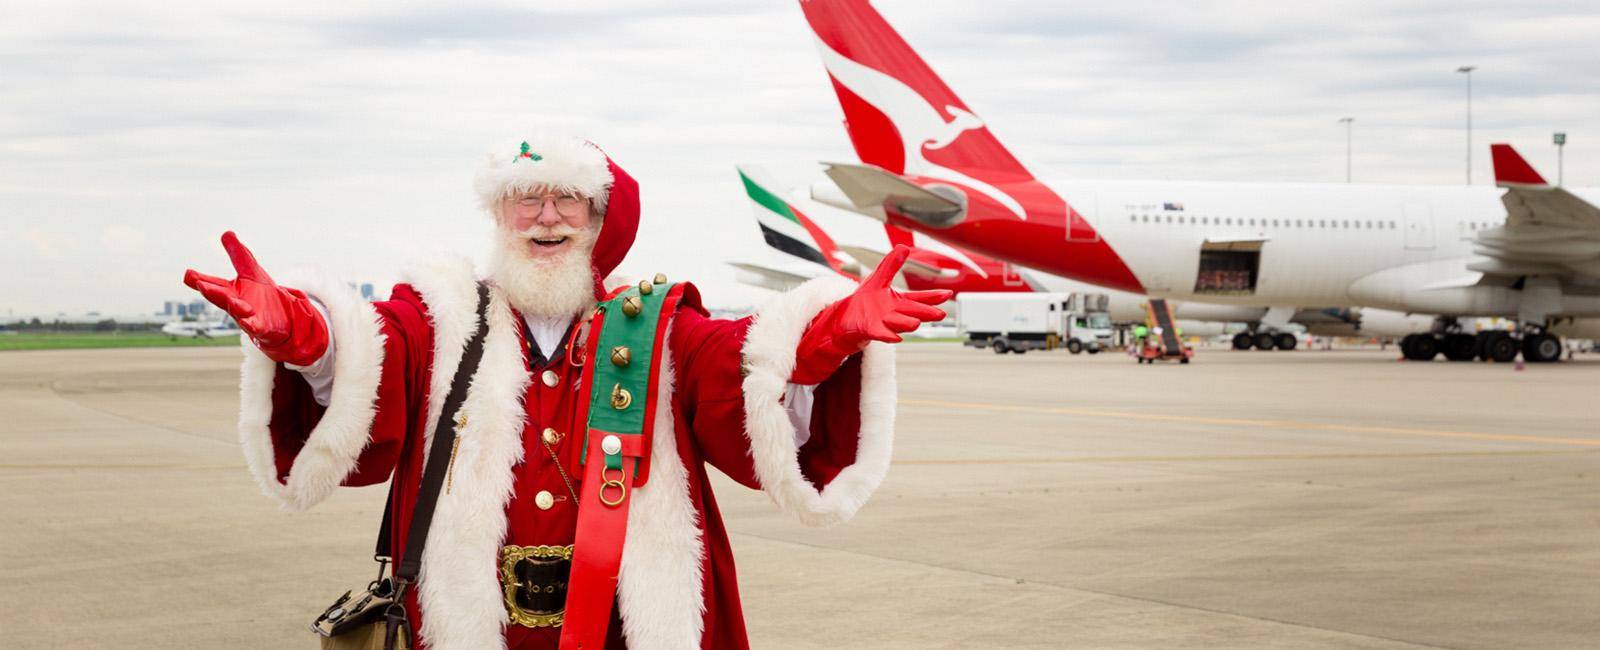 Santa Claus standing with arms wide open and smiling face in front of two airplanes at Brisbane airport